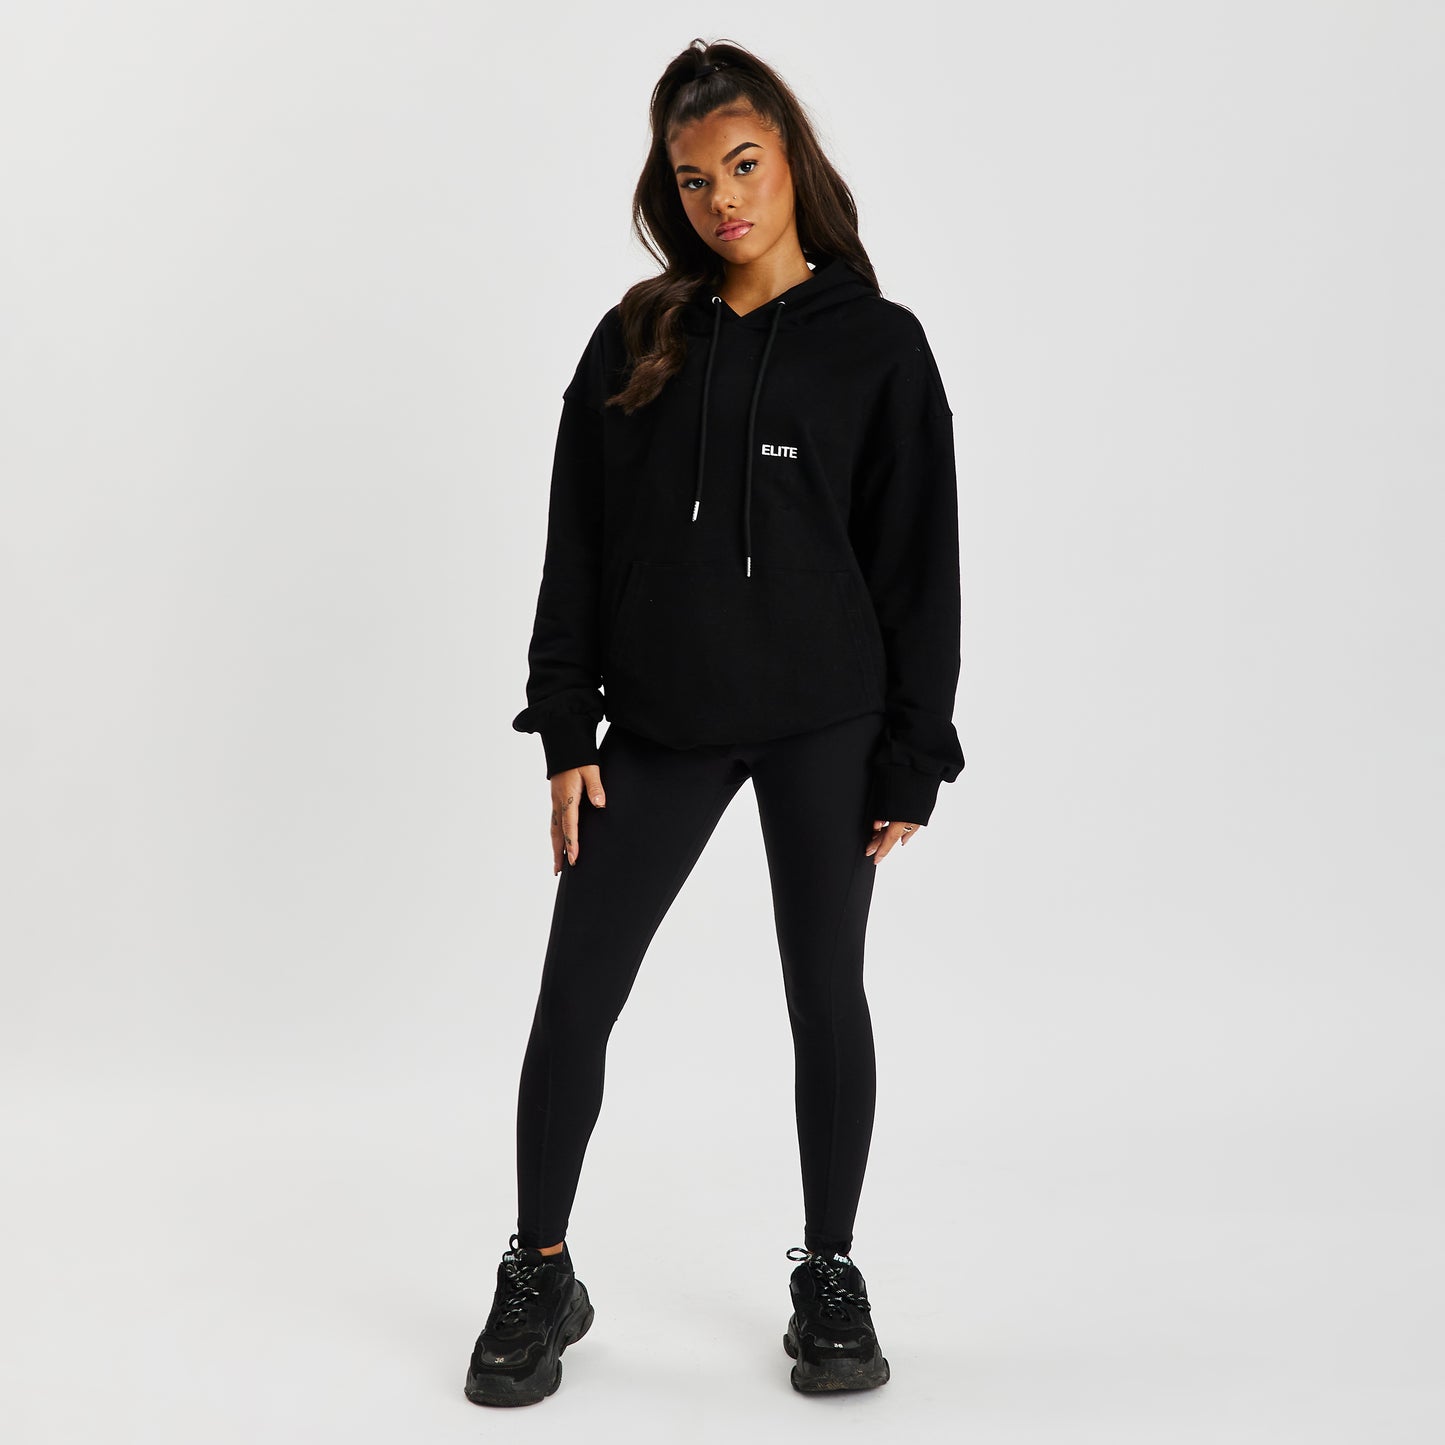 Envolve Midnight unisex black string hoodie with cuffed sleeves